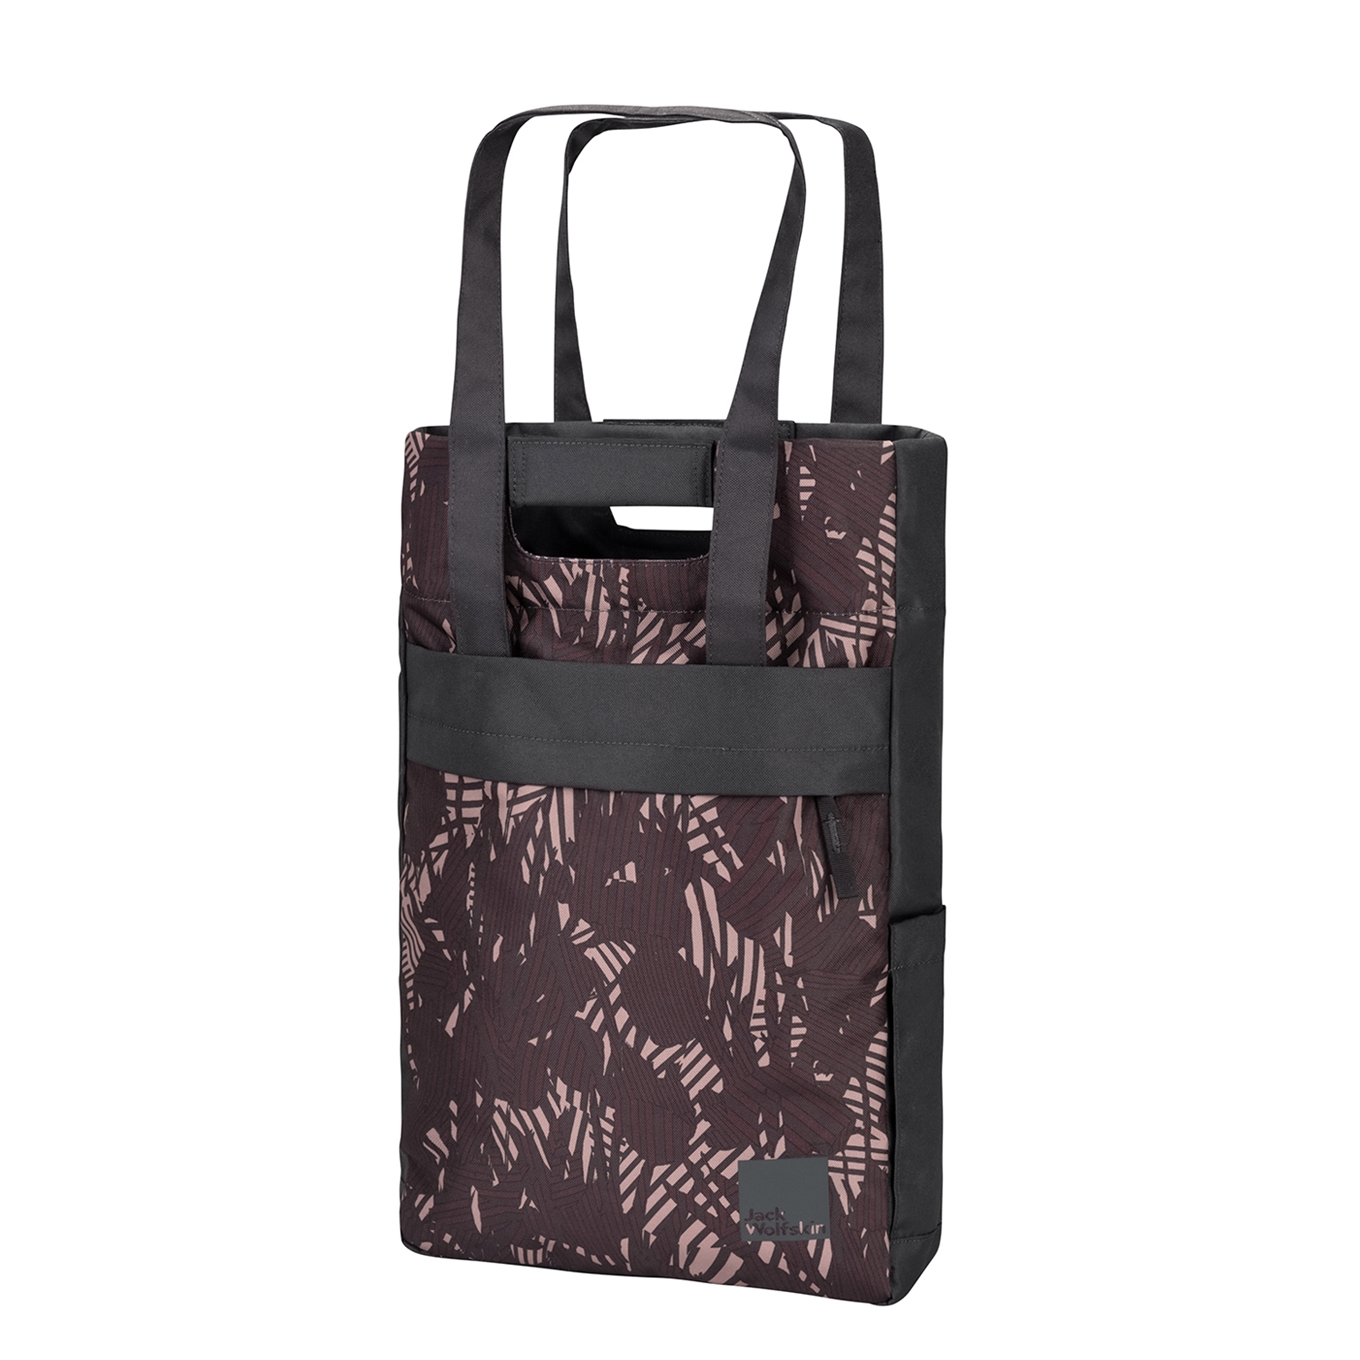 hanger decaan kleinhandel Jack Wolfskin Piccadilly Tote Bag graphite all over | Travelbags.be